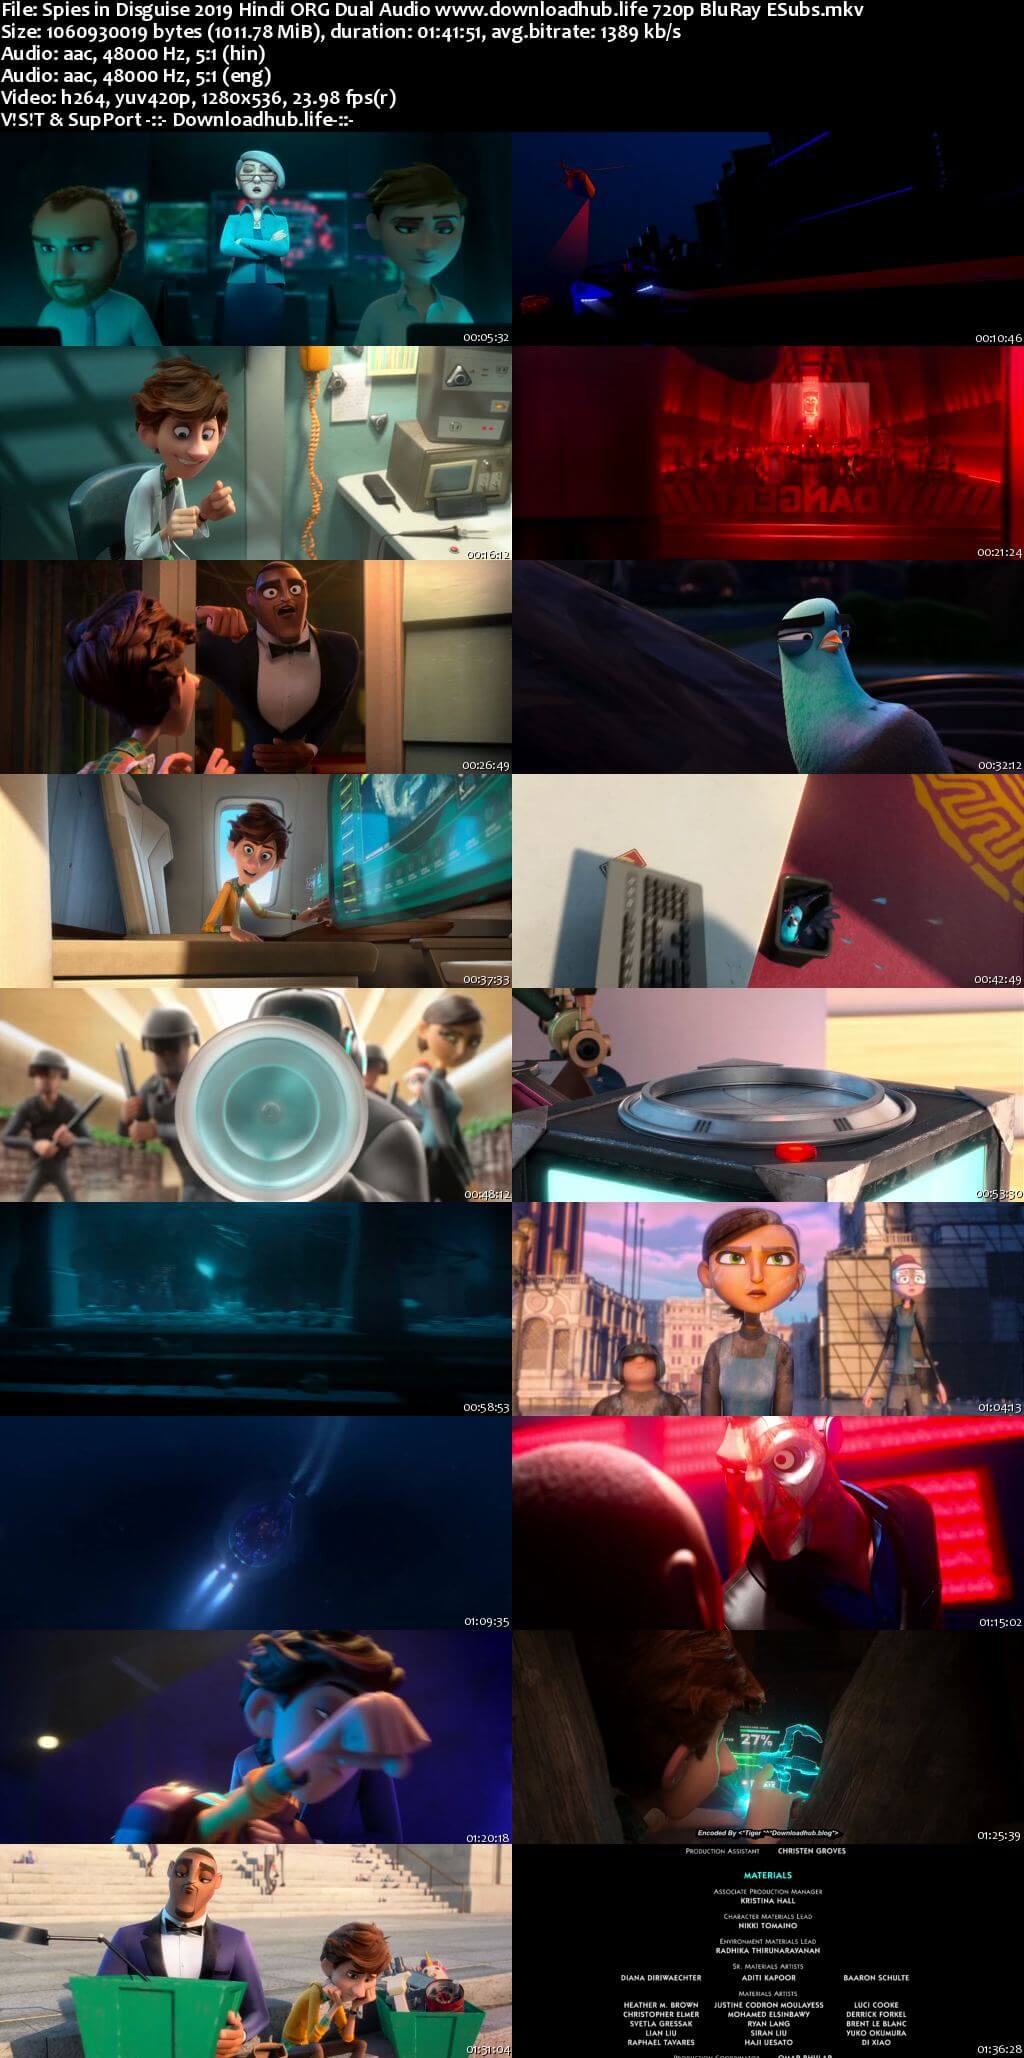 Spies in Disguise 2019 Hindi ORG Dual Audio 720p BluRay ESubs